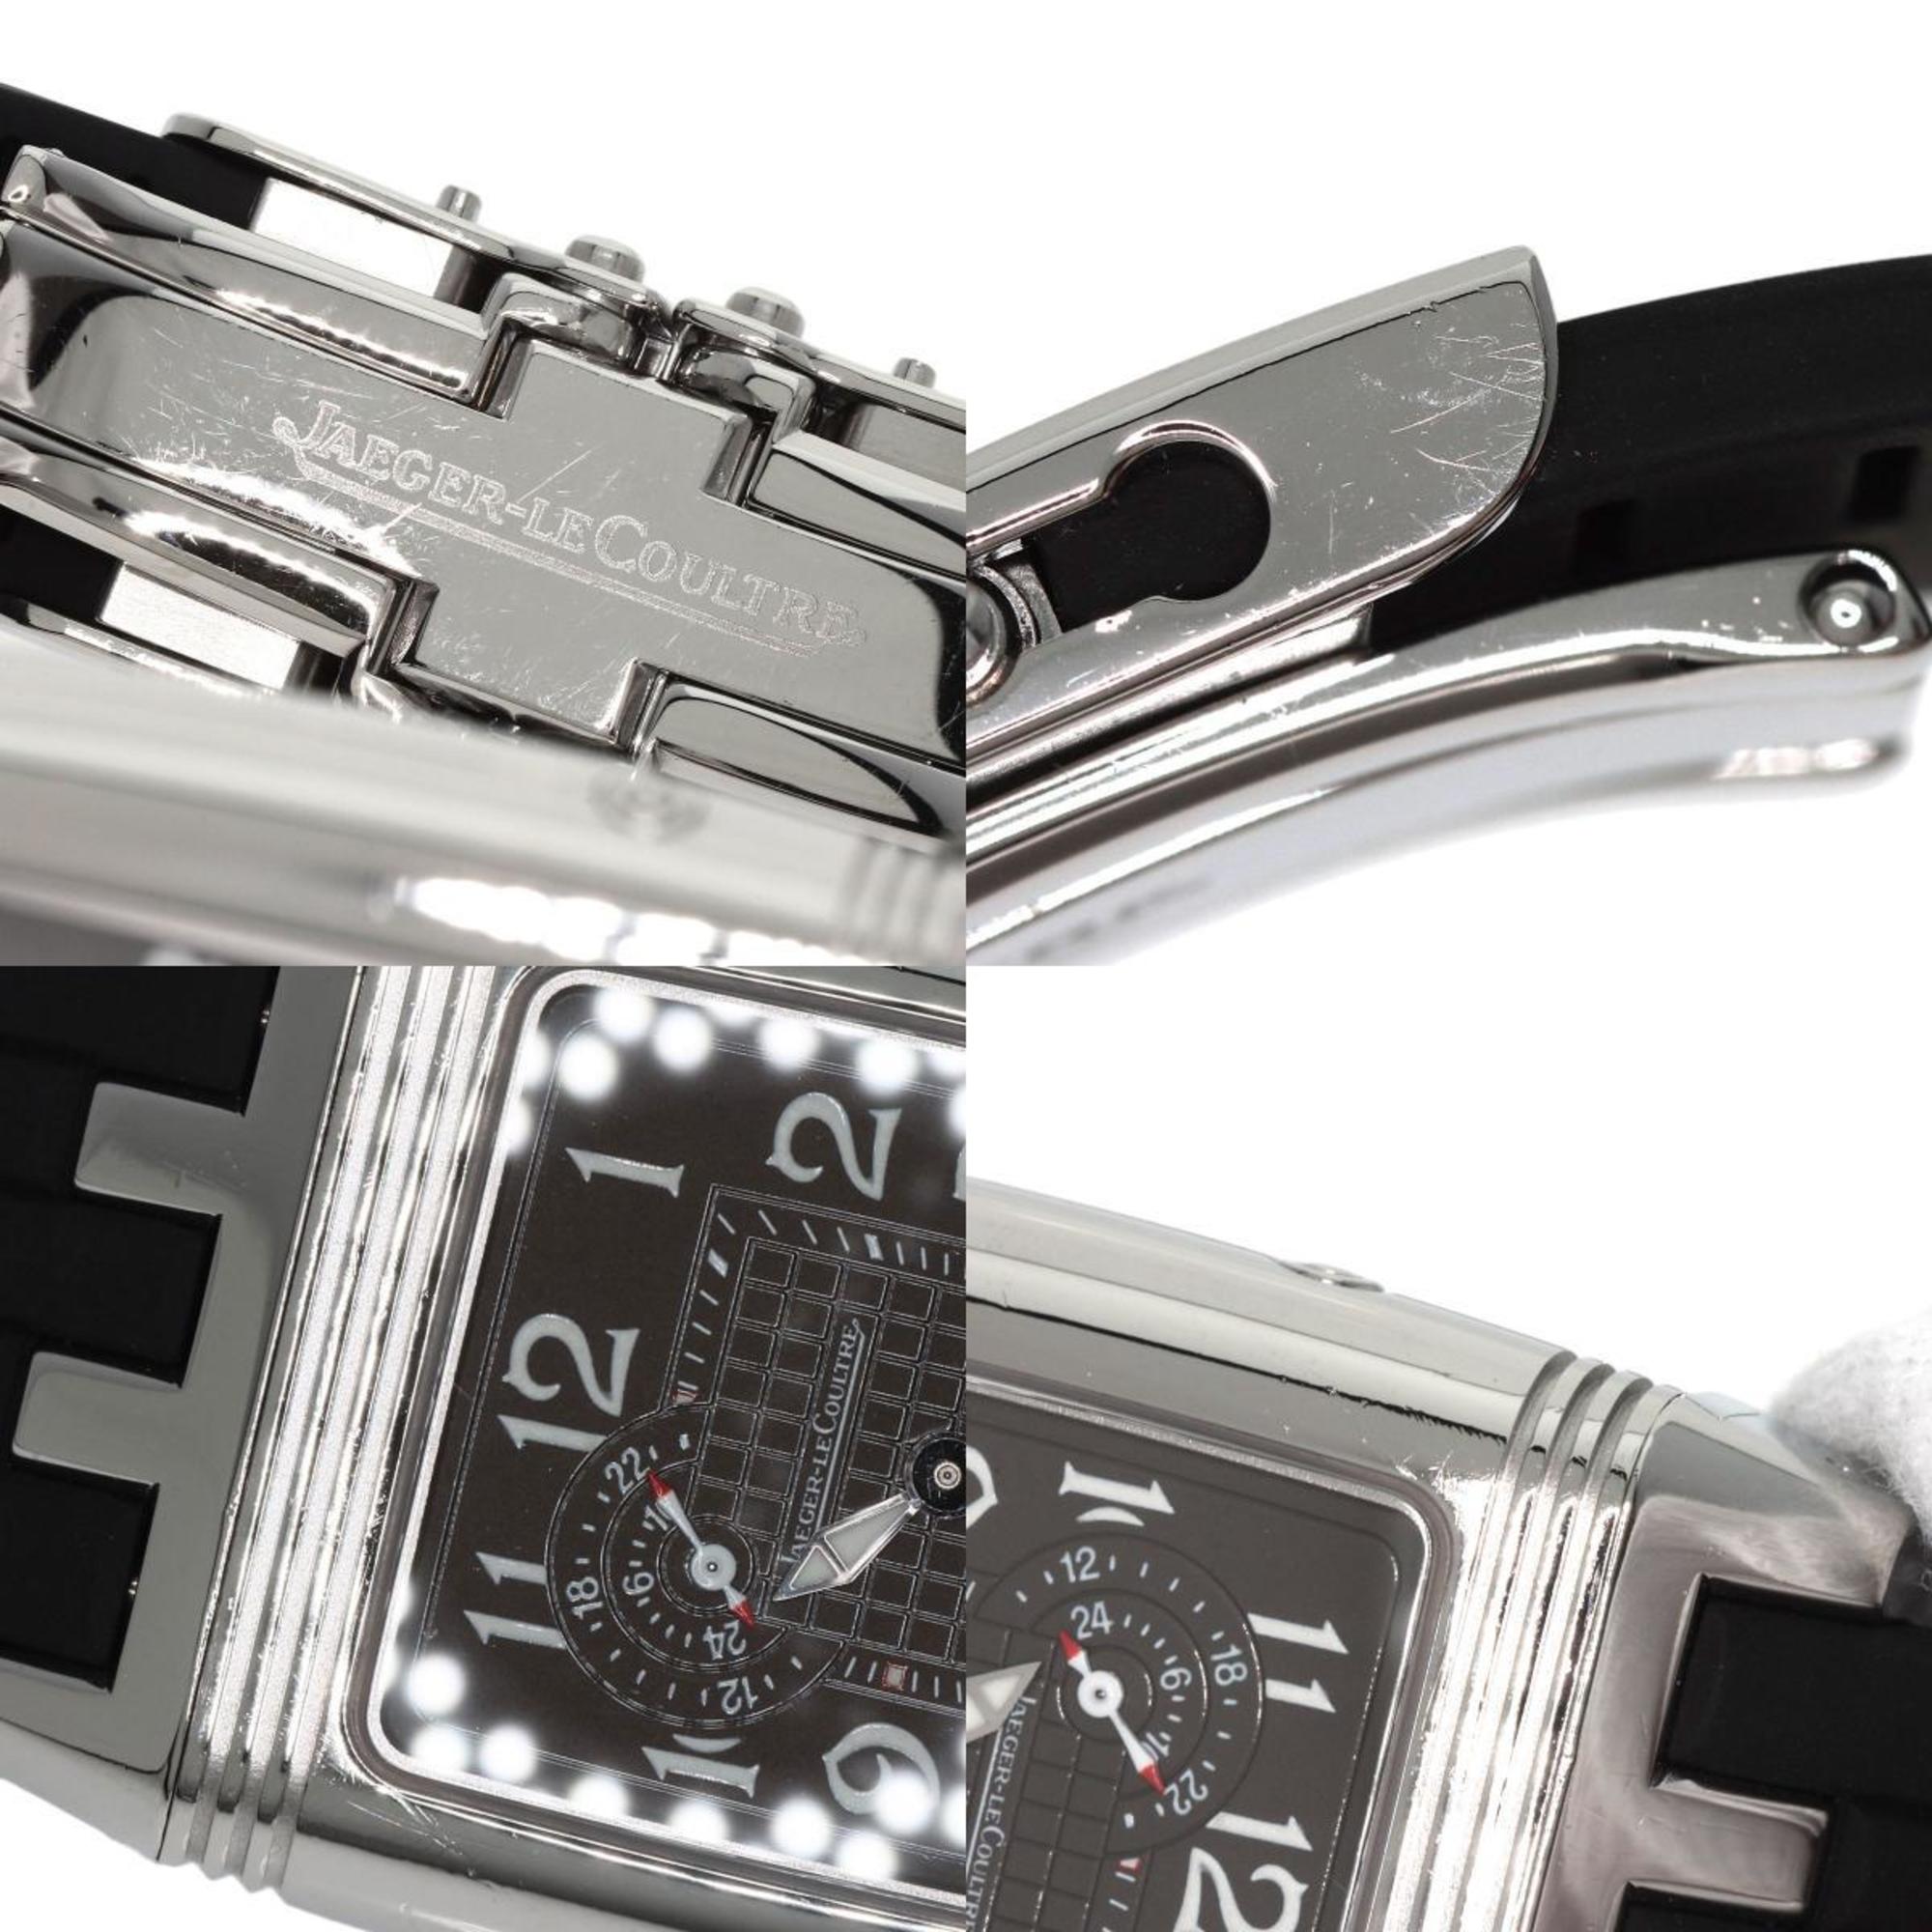 Jaeger-LeCoultre 295.8.51 Q2948601 Reverso Grand Sport Duo Maker Complete Watch Stainless Steel Rubber Men's